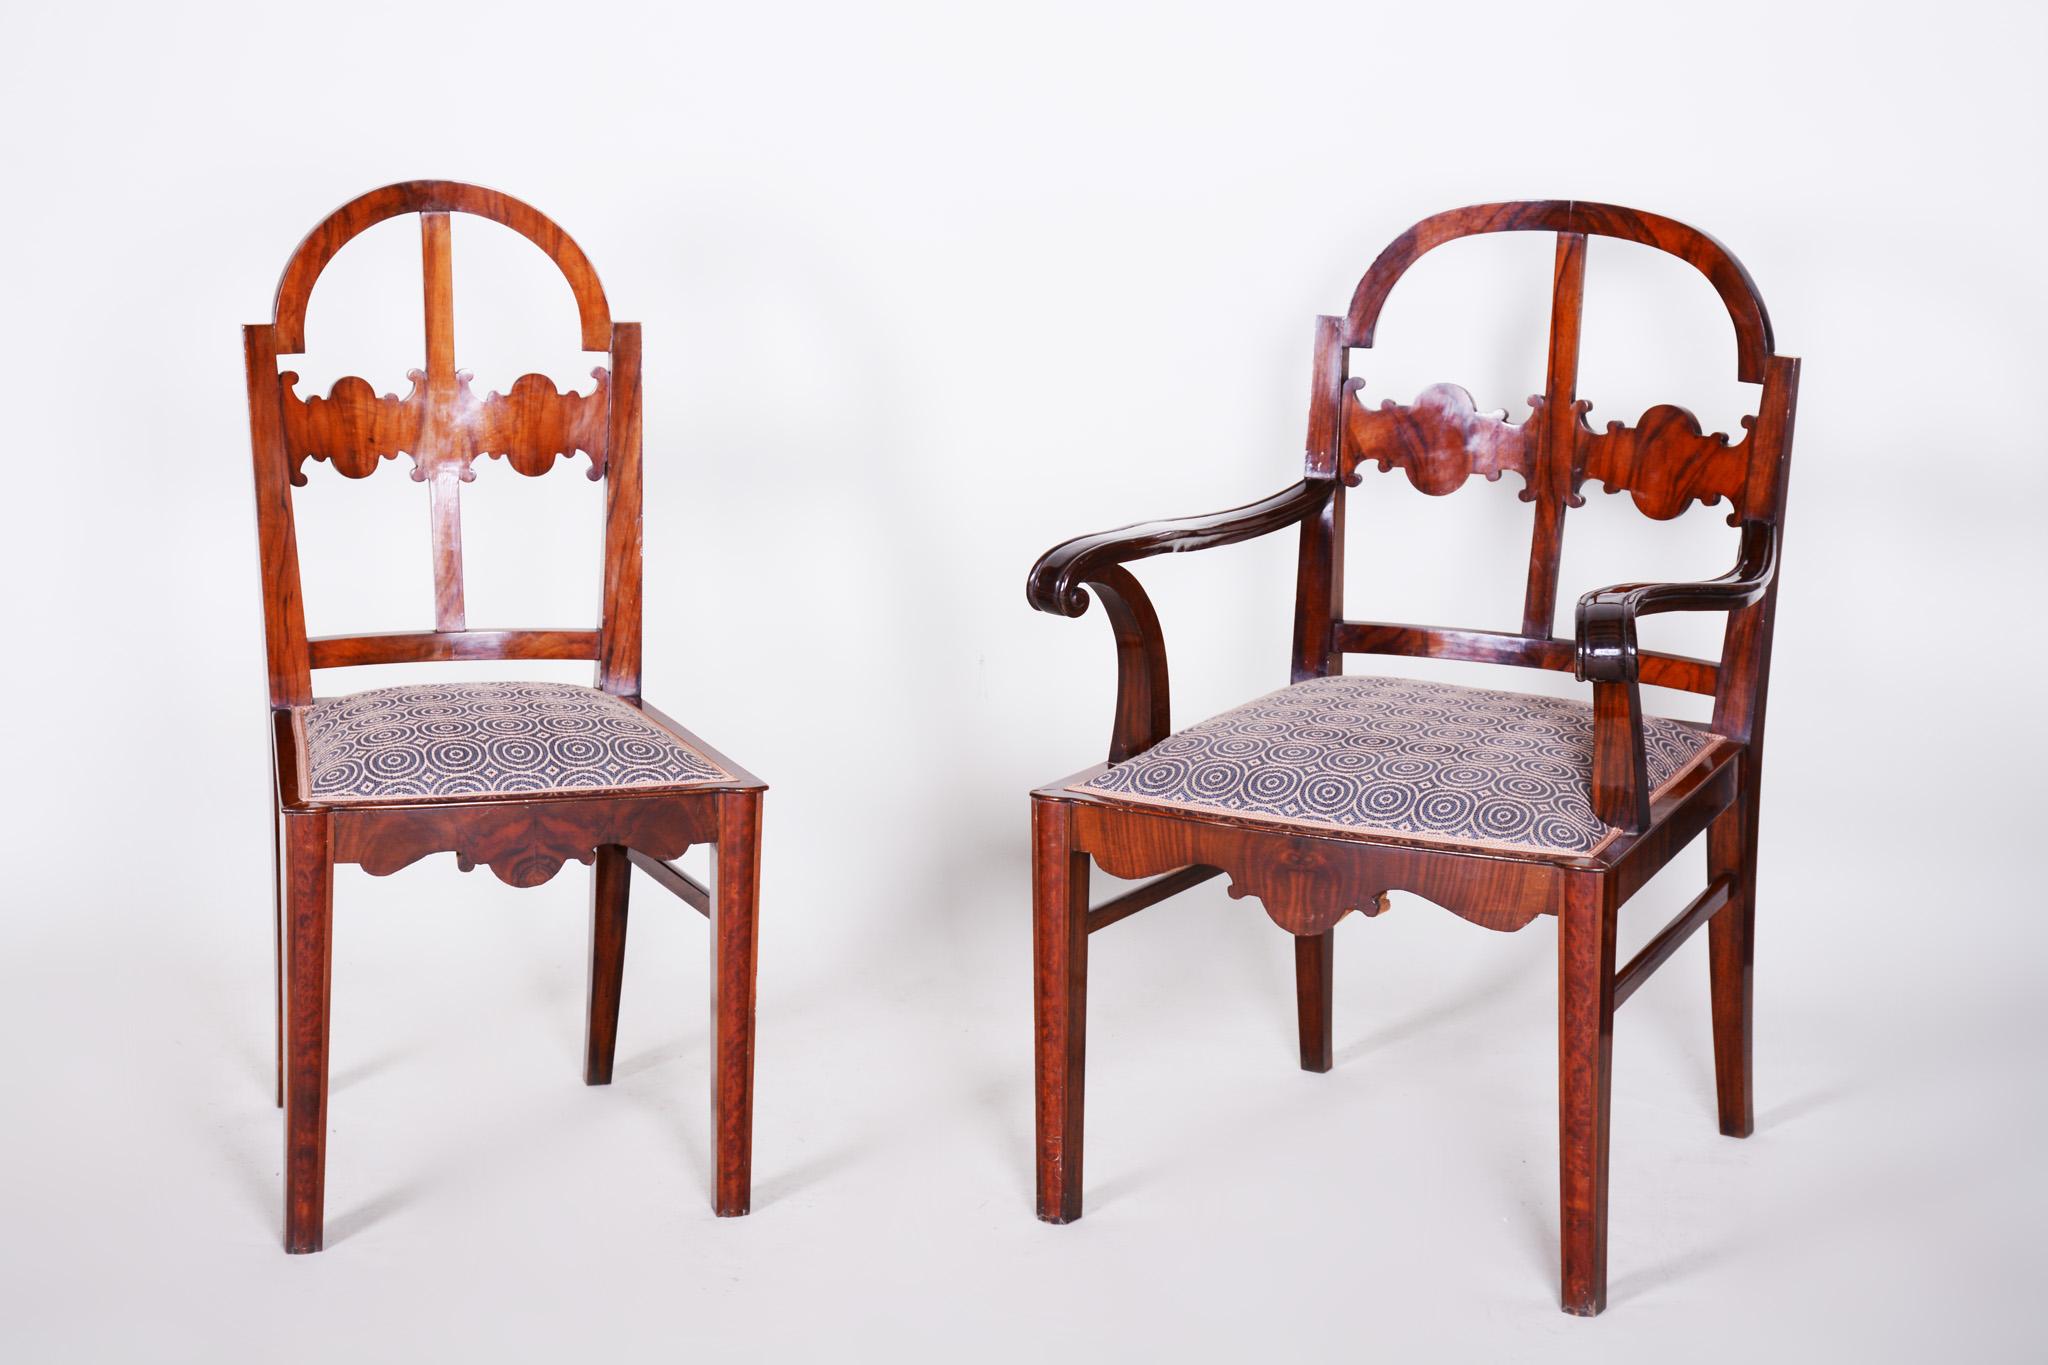 Walnut Art Deco Seating Set, 2 Armchairs and 4 Chairs, Shellac Polish, 1920s For Sale 7